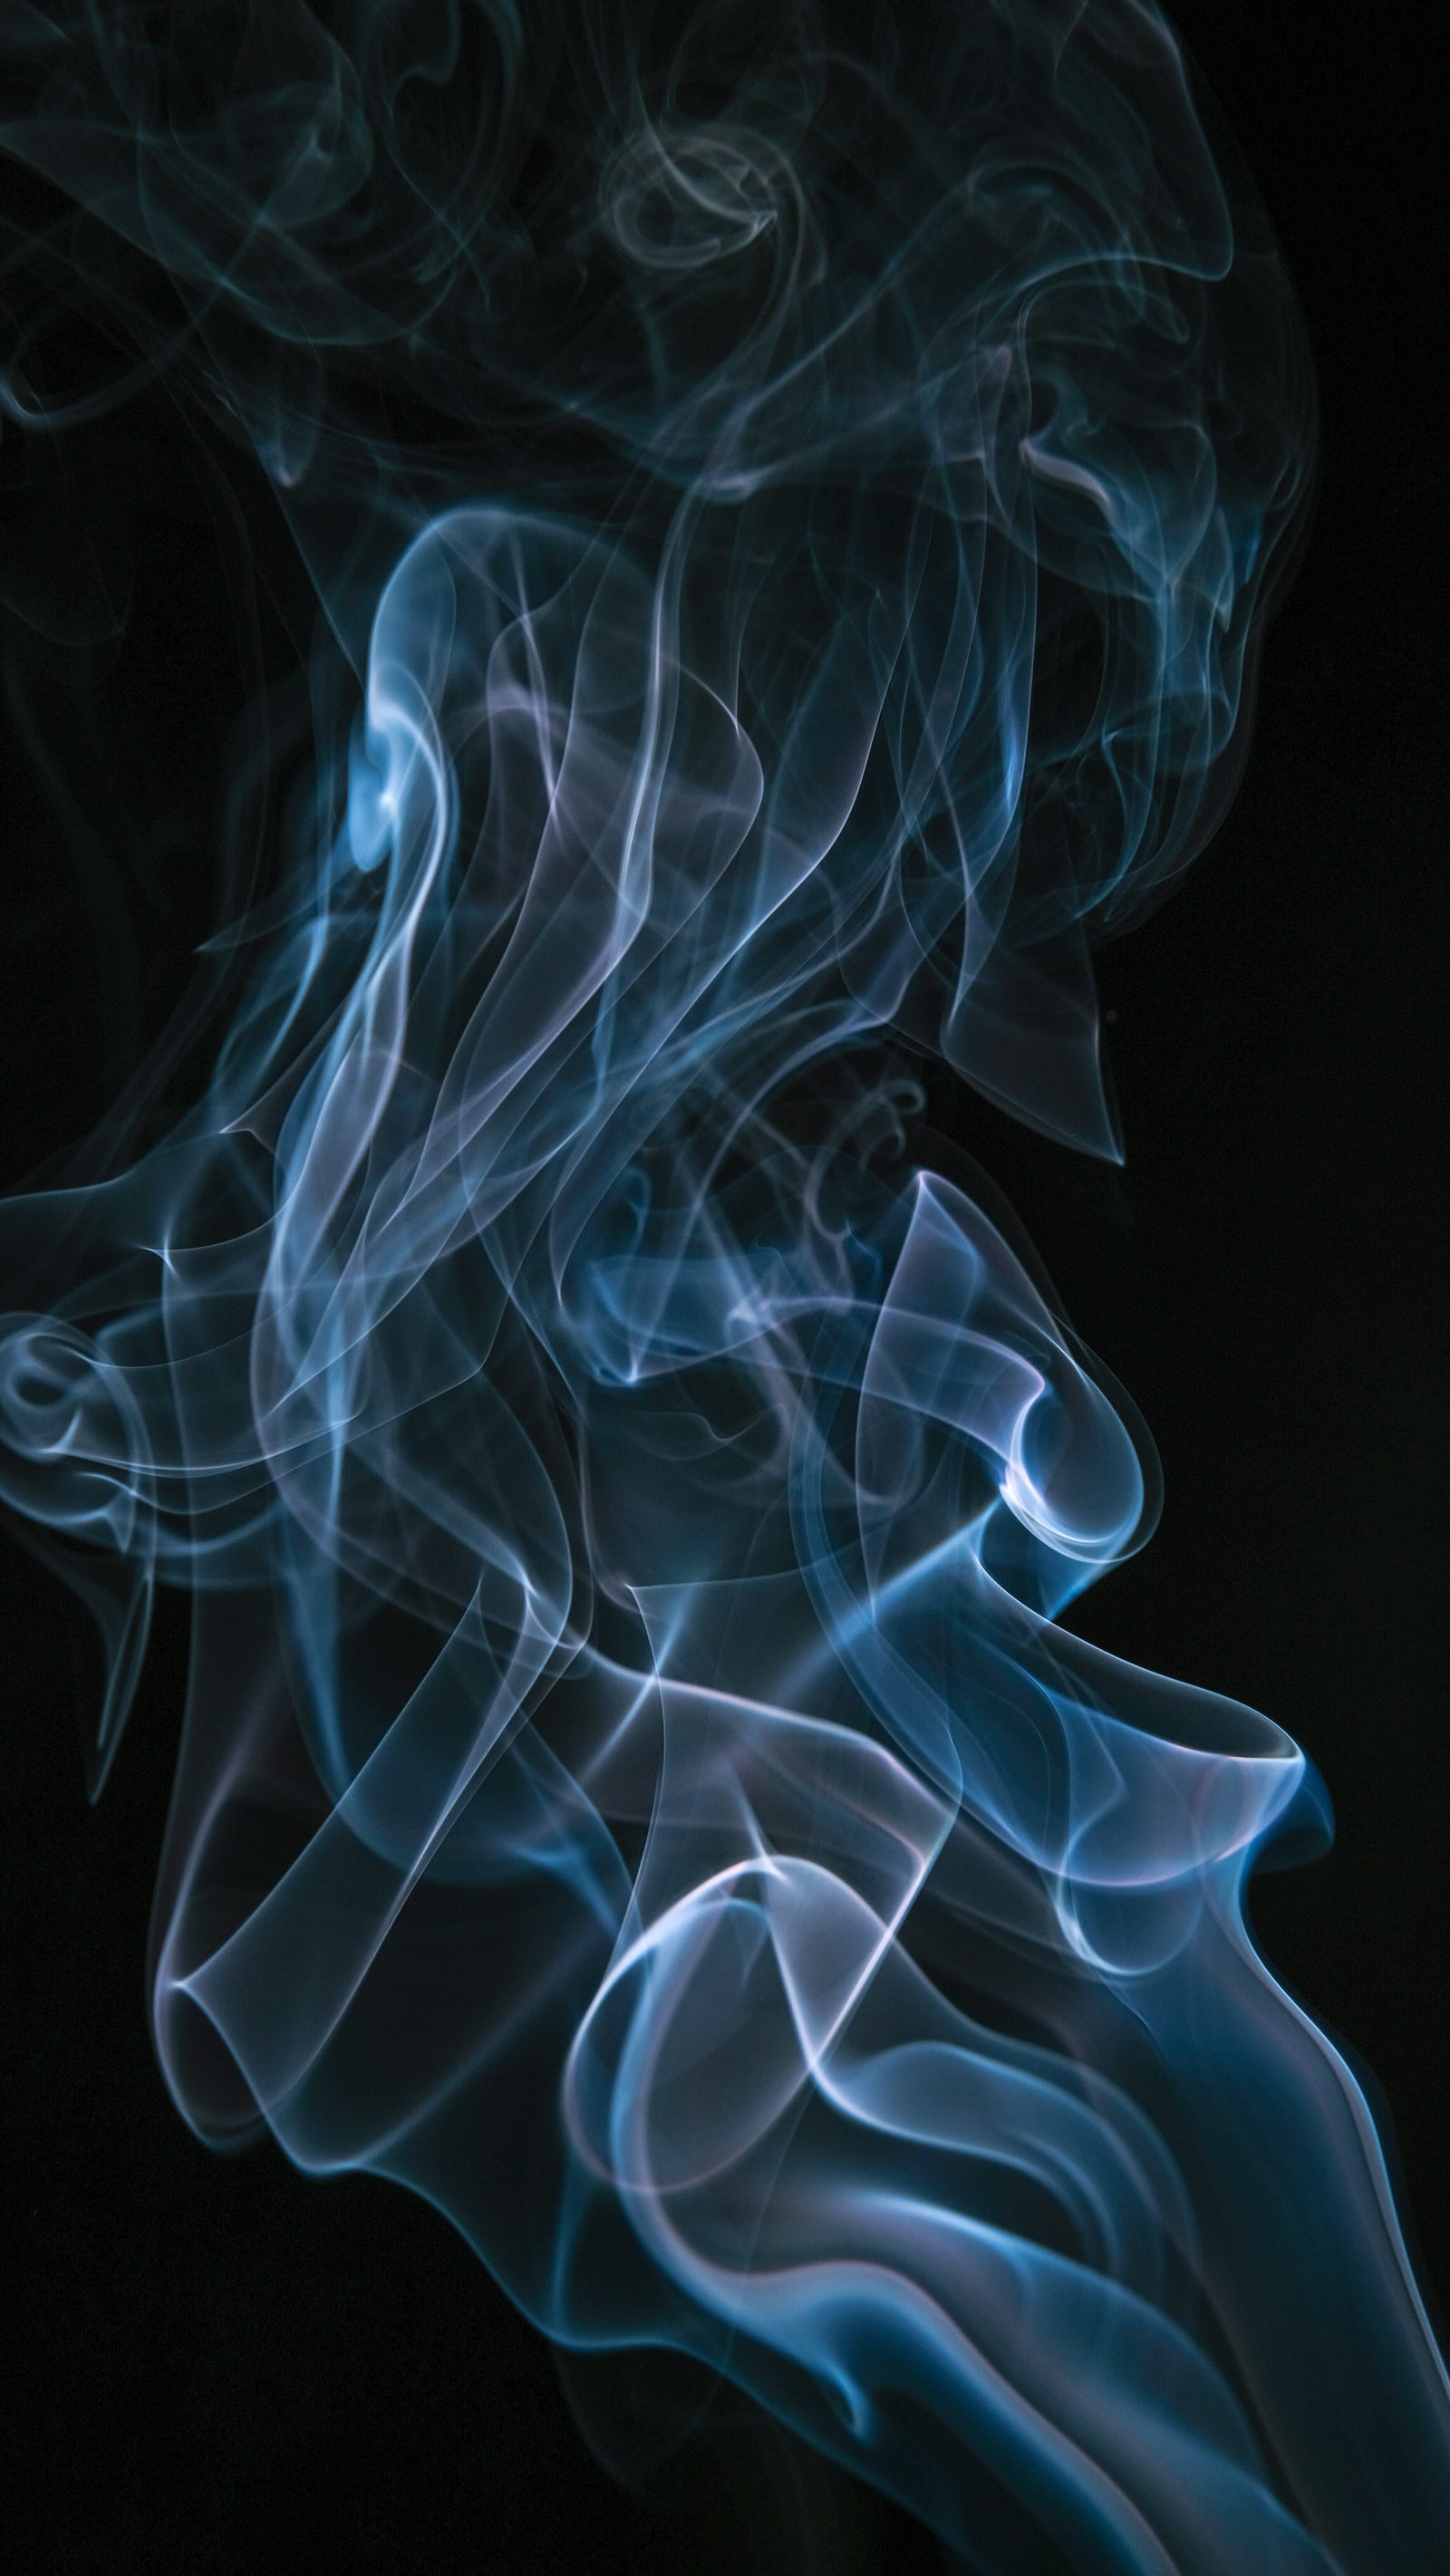 Trails of white smoke rise. Smoke cigarettes, and you have a 15 to 30 times higher risk of getting (or dying from) lung cancer, according to the US National Institutes of Health.